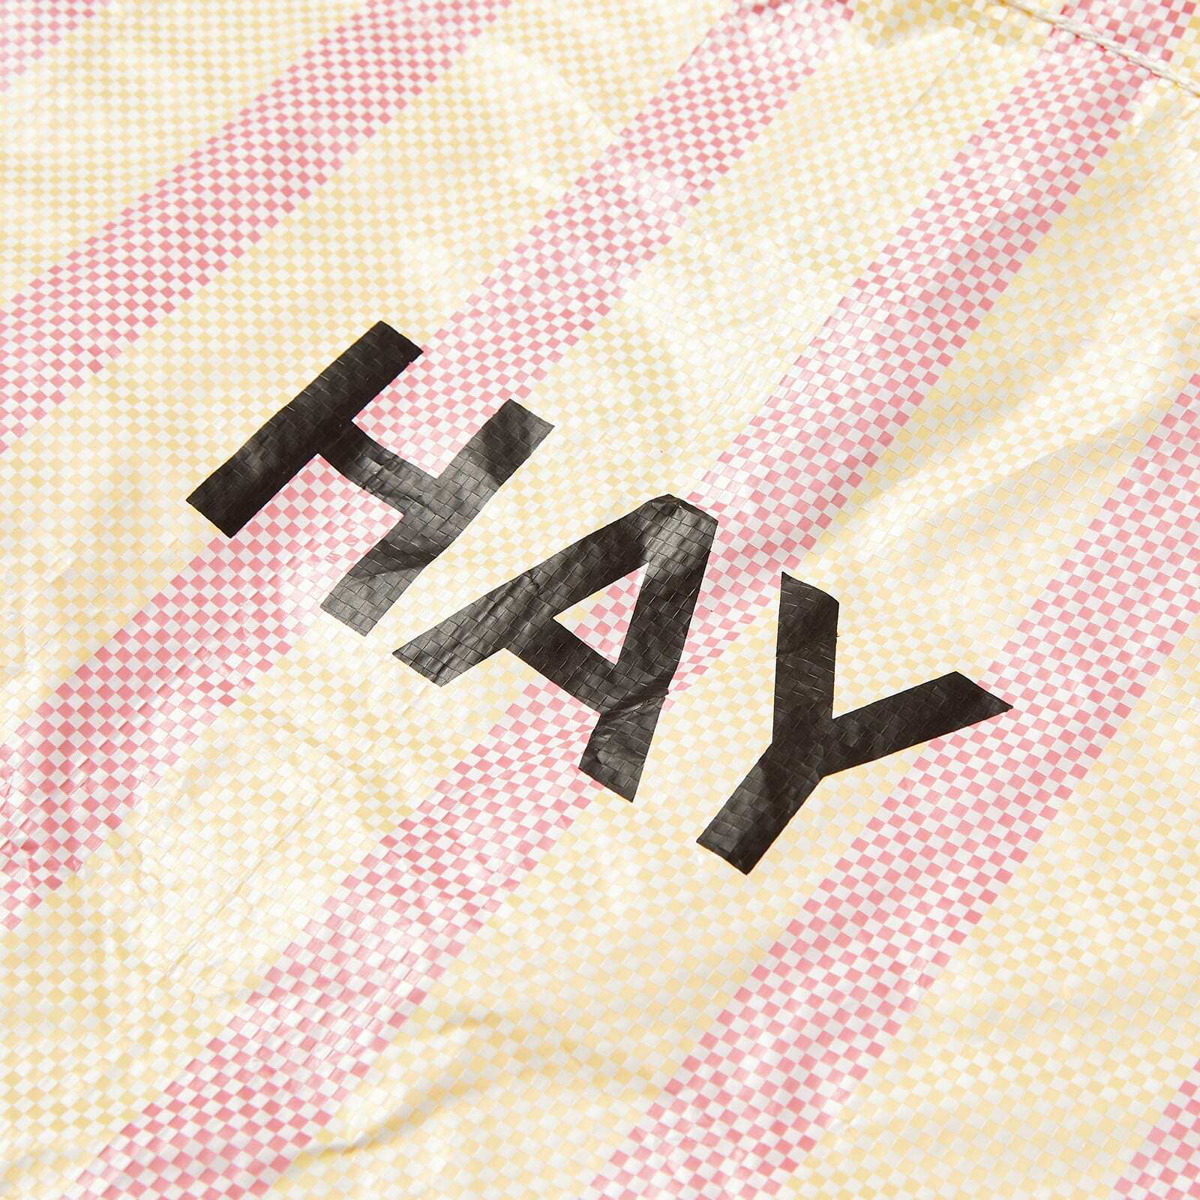 HAY Candy Stripe wash bag, S, red and yellow